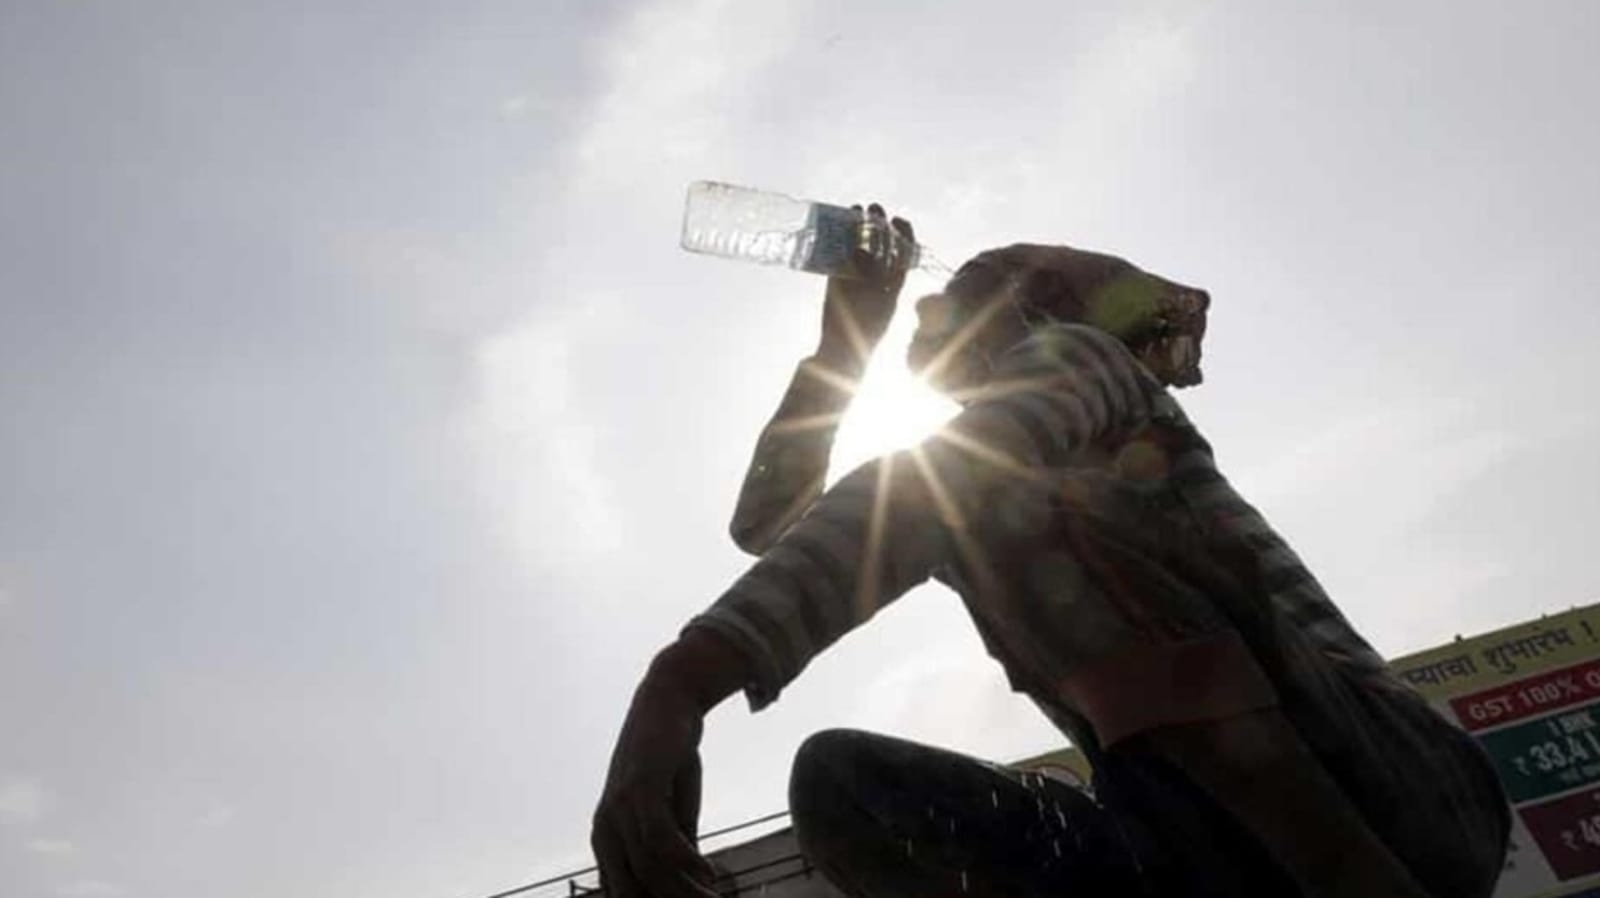 Heatwave in Mumbai Common symptoms of heat exhaustion; tips to beat